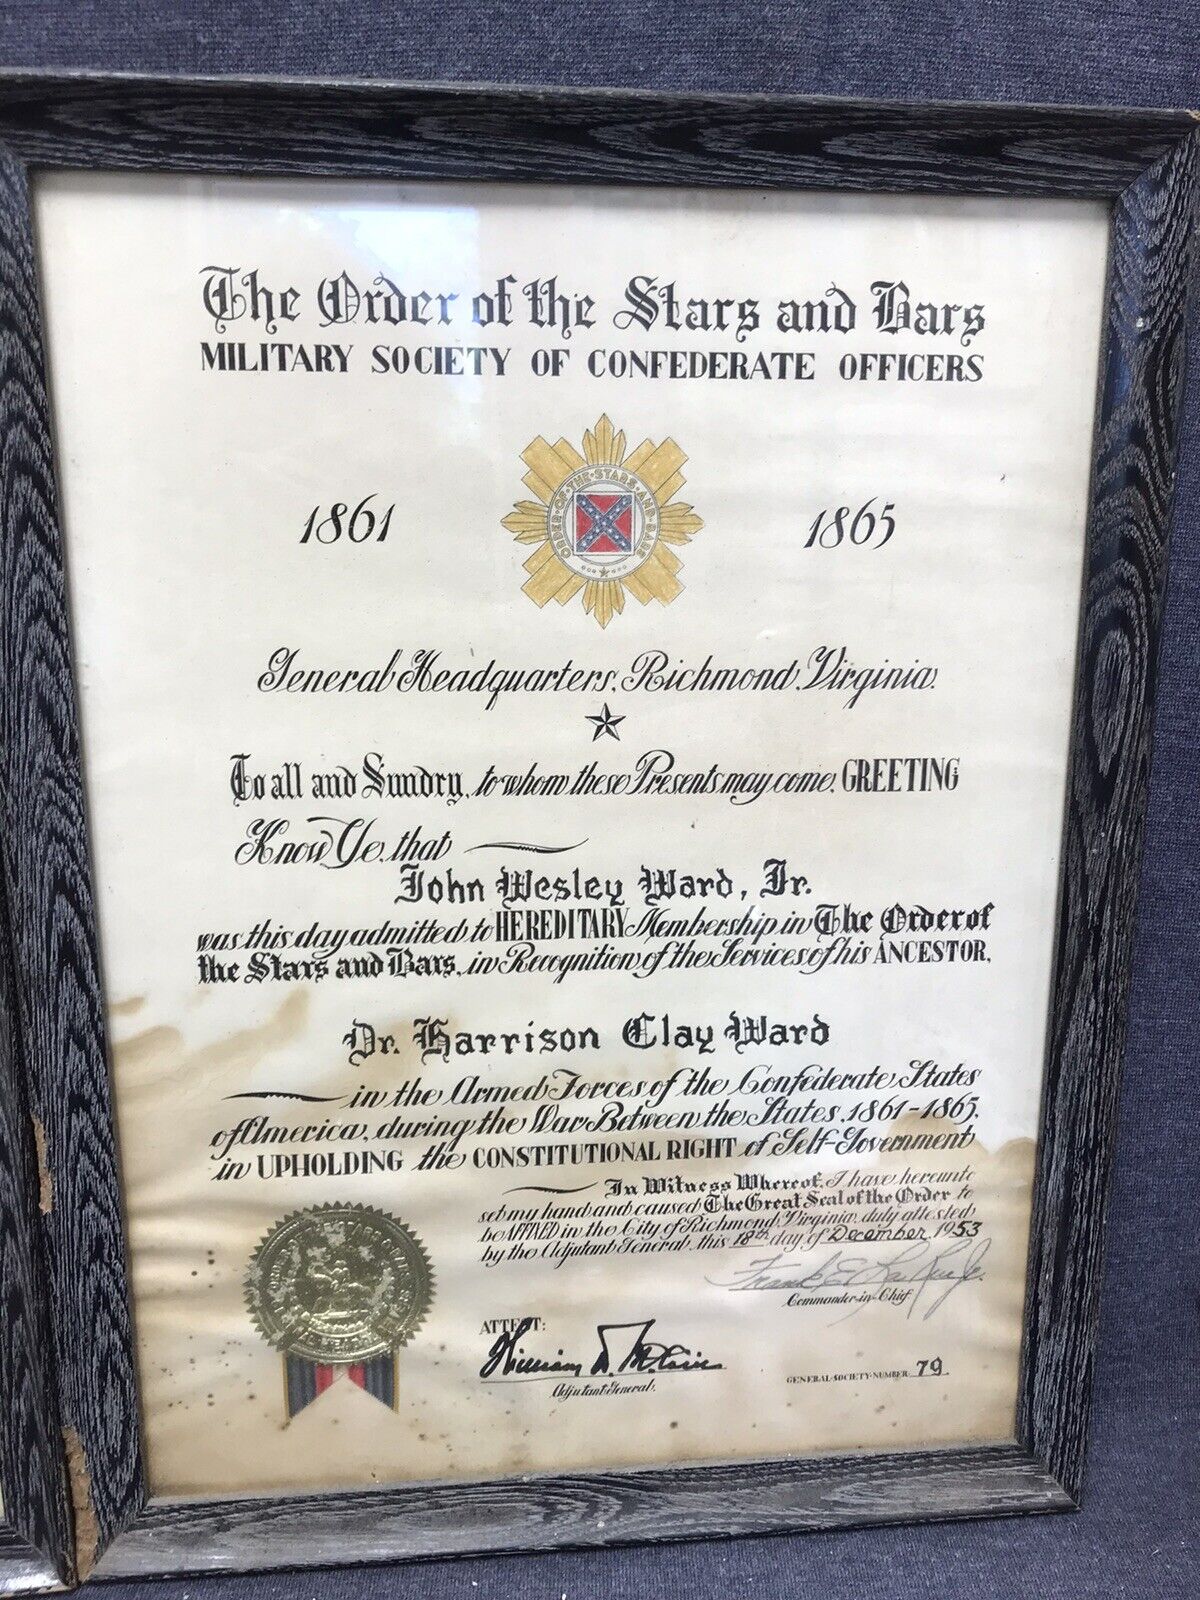 Military Society Of Confederate Officers Certificate Dr Harrison Clay Ward